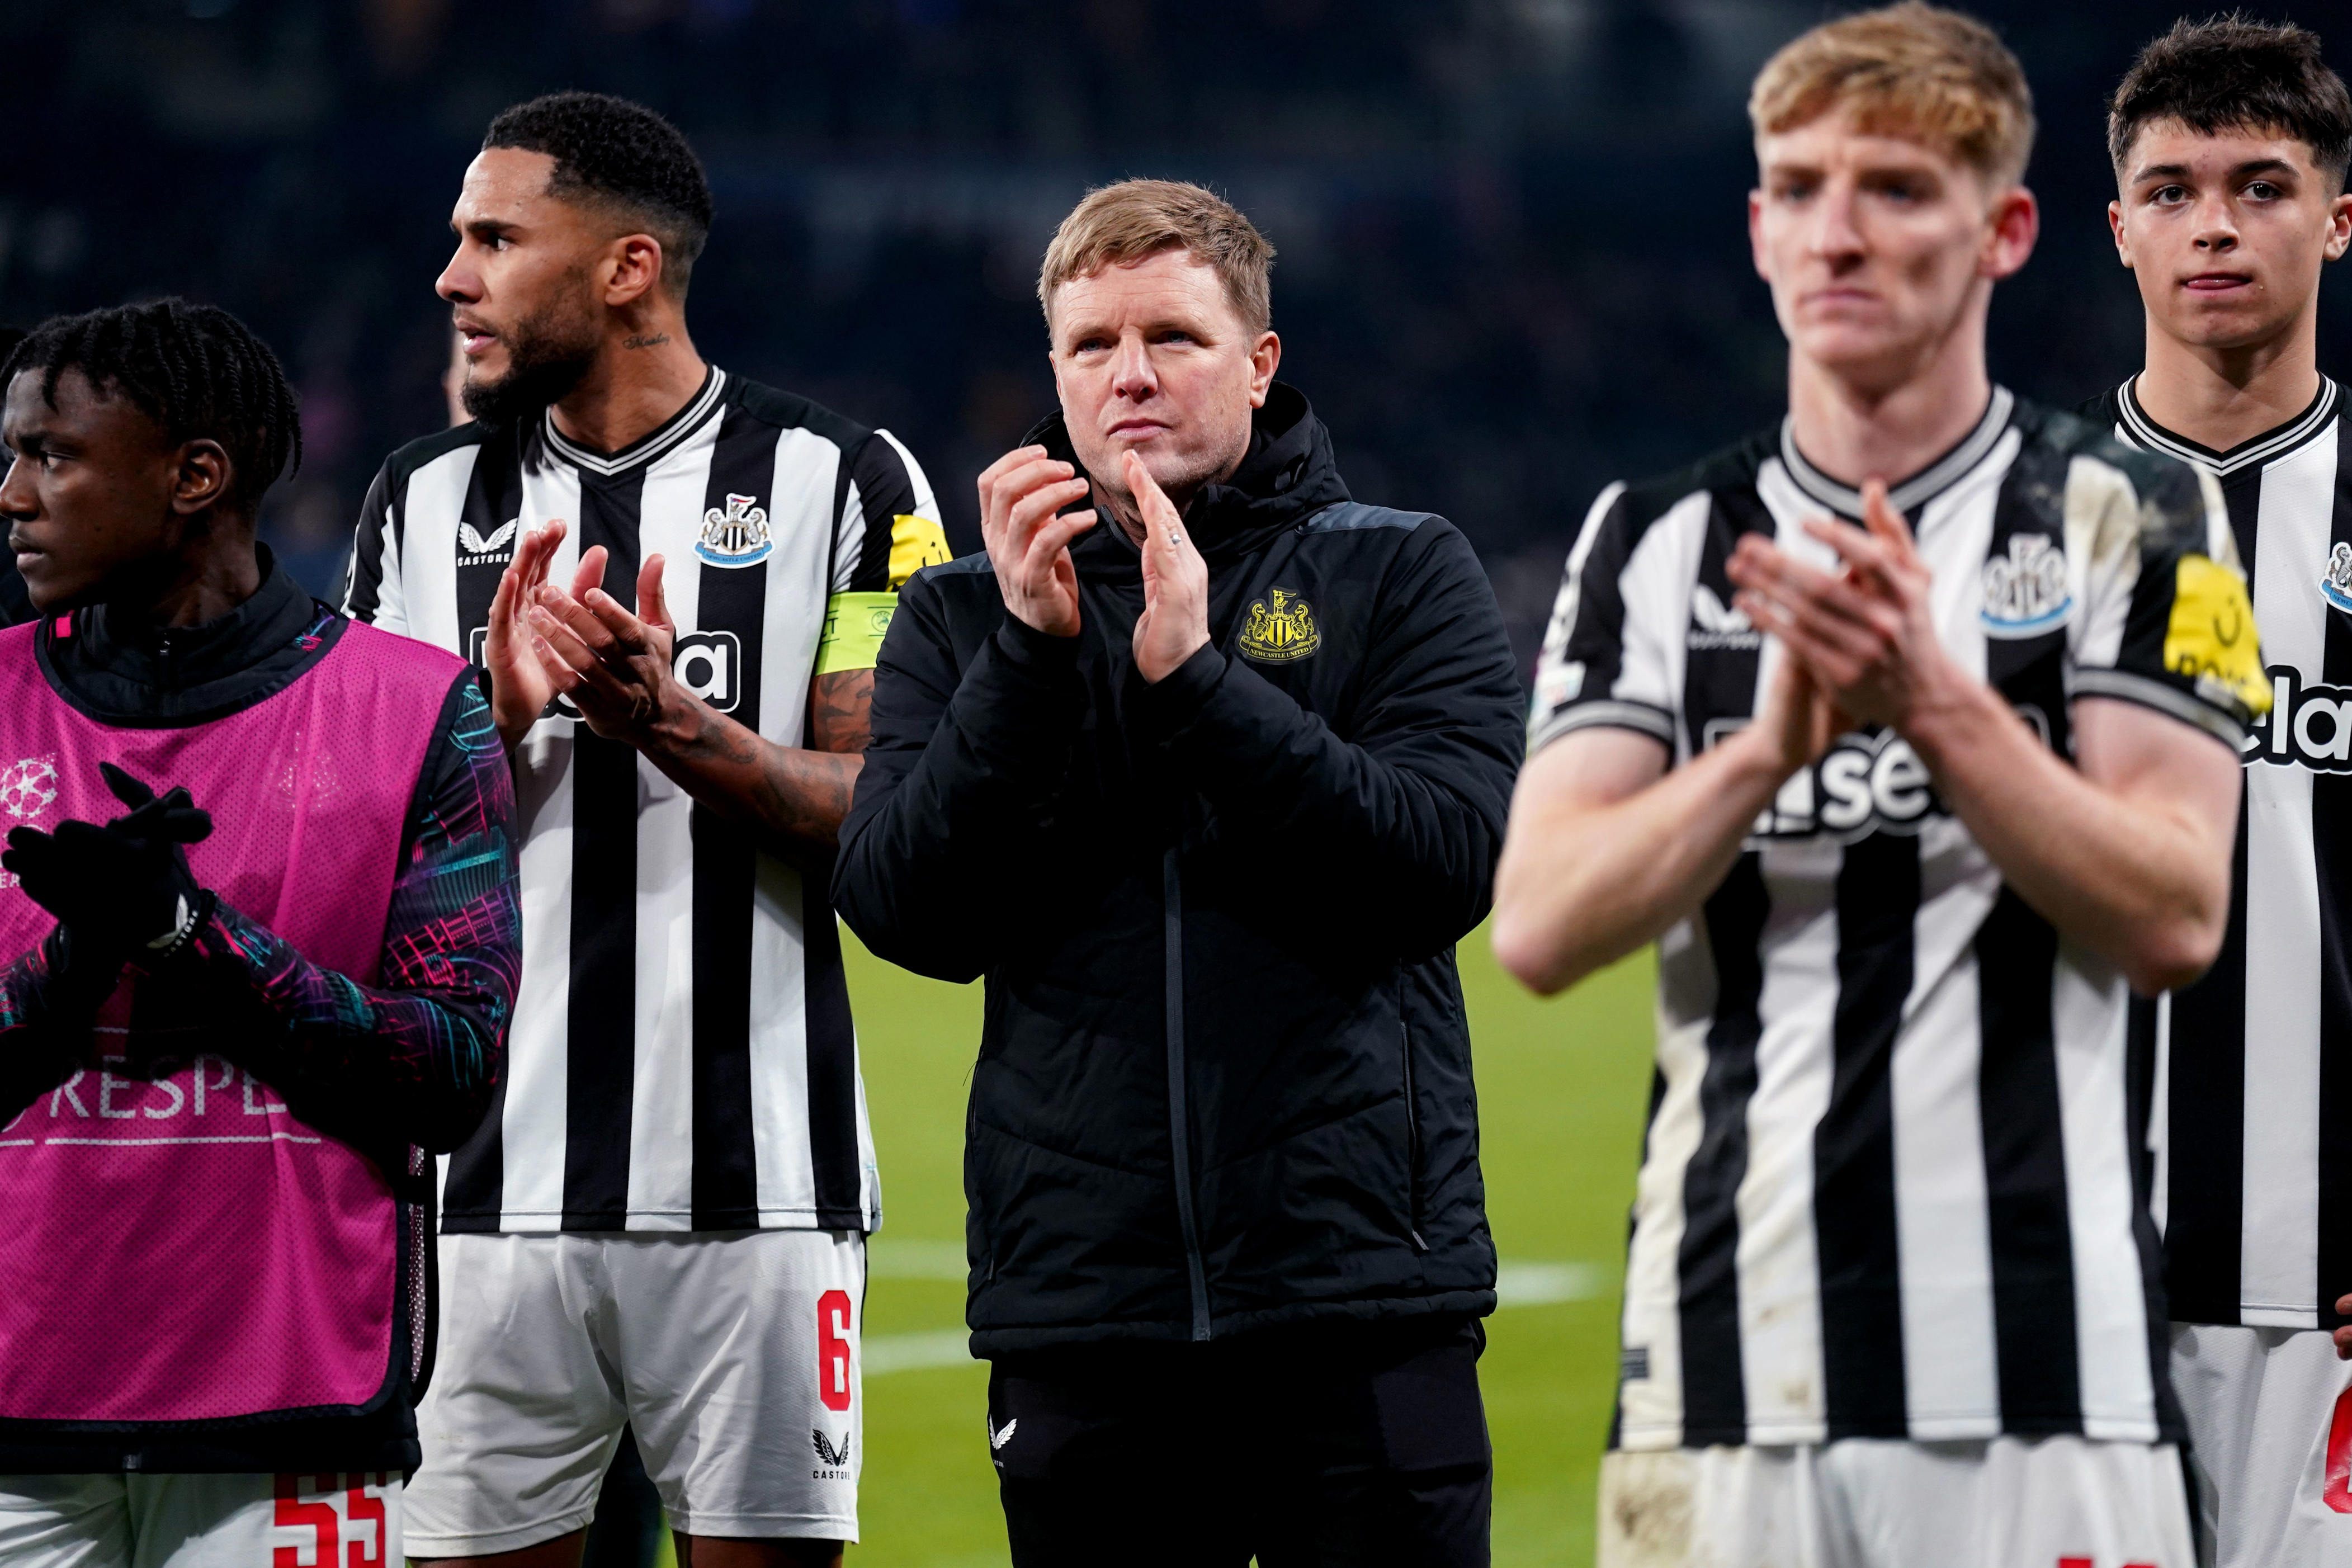 uefa drop var official who gave controversial psg penalty vs newcastle